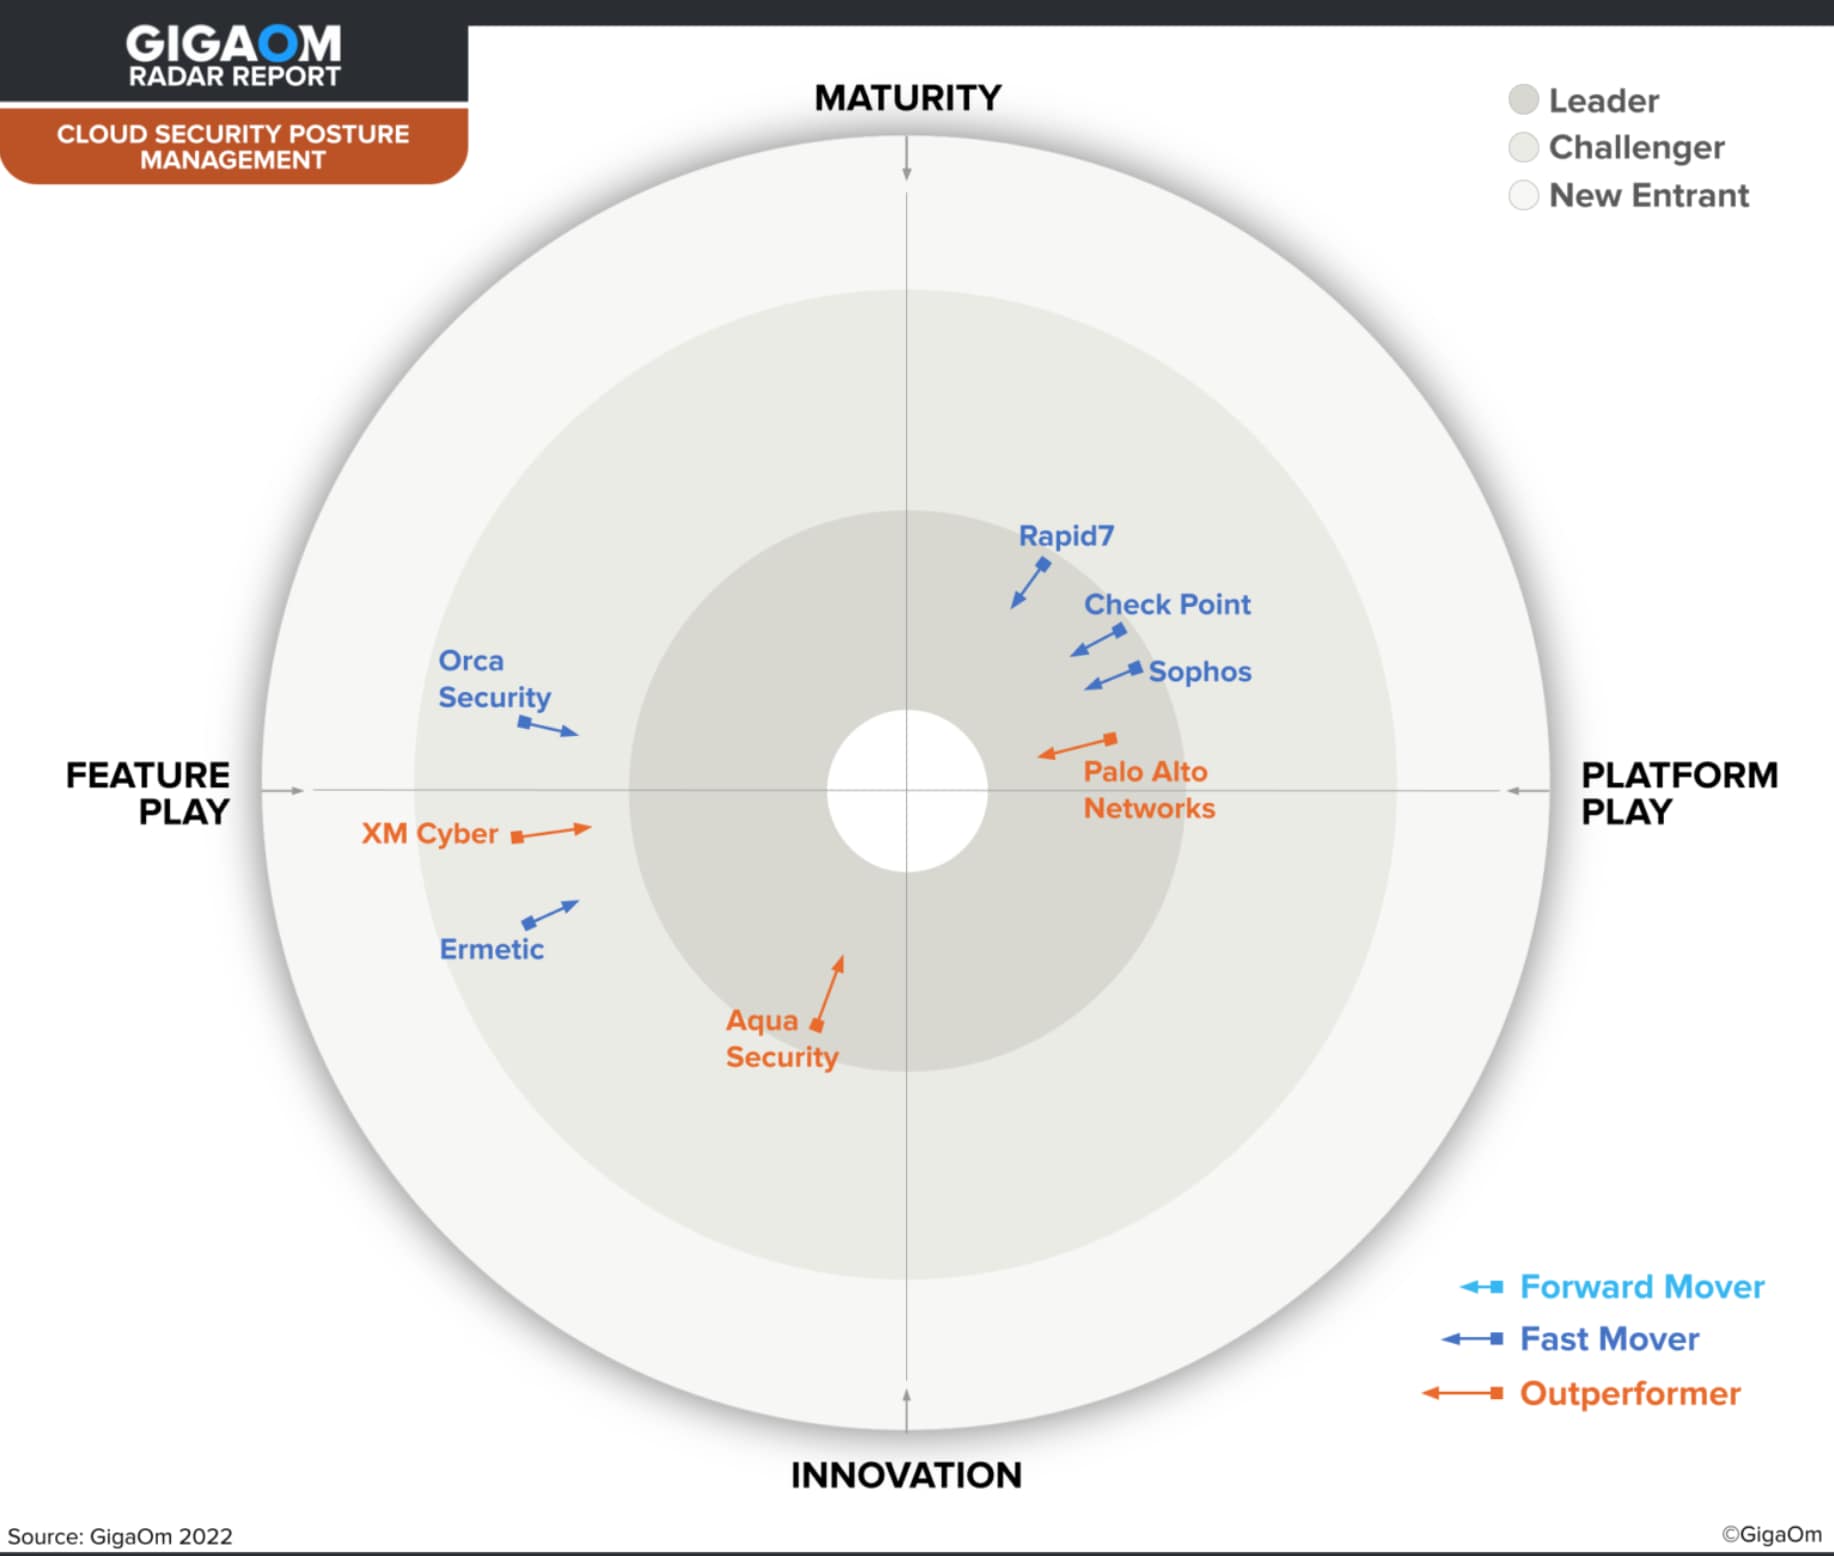 GigaOm Radar for Cloud Security Posture Management Ranks Prisma Cloud by Palo Alto Networks as the Leader by Showing it Closest to the Center of their CSPM Radar